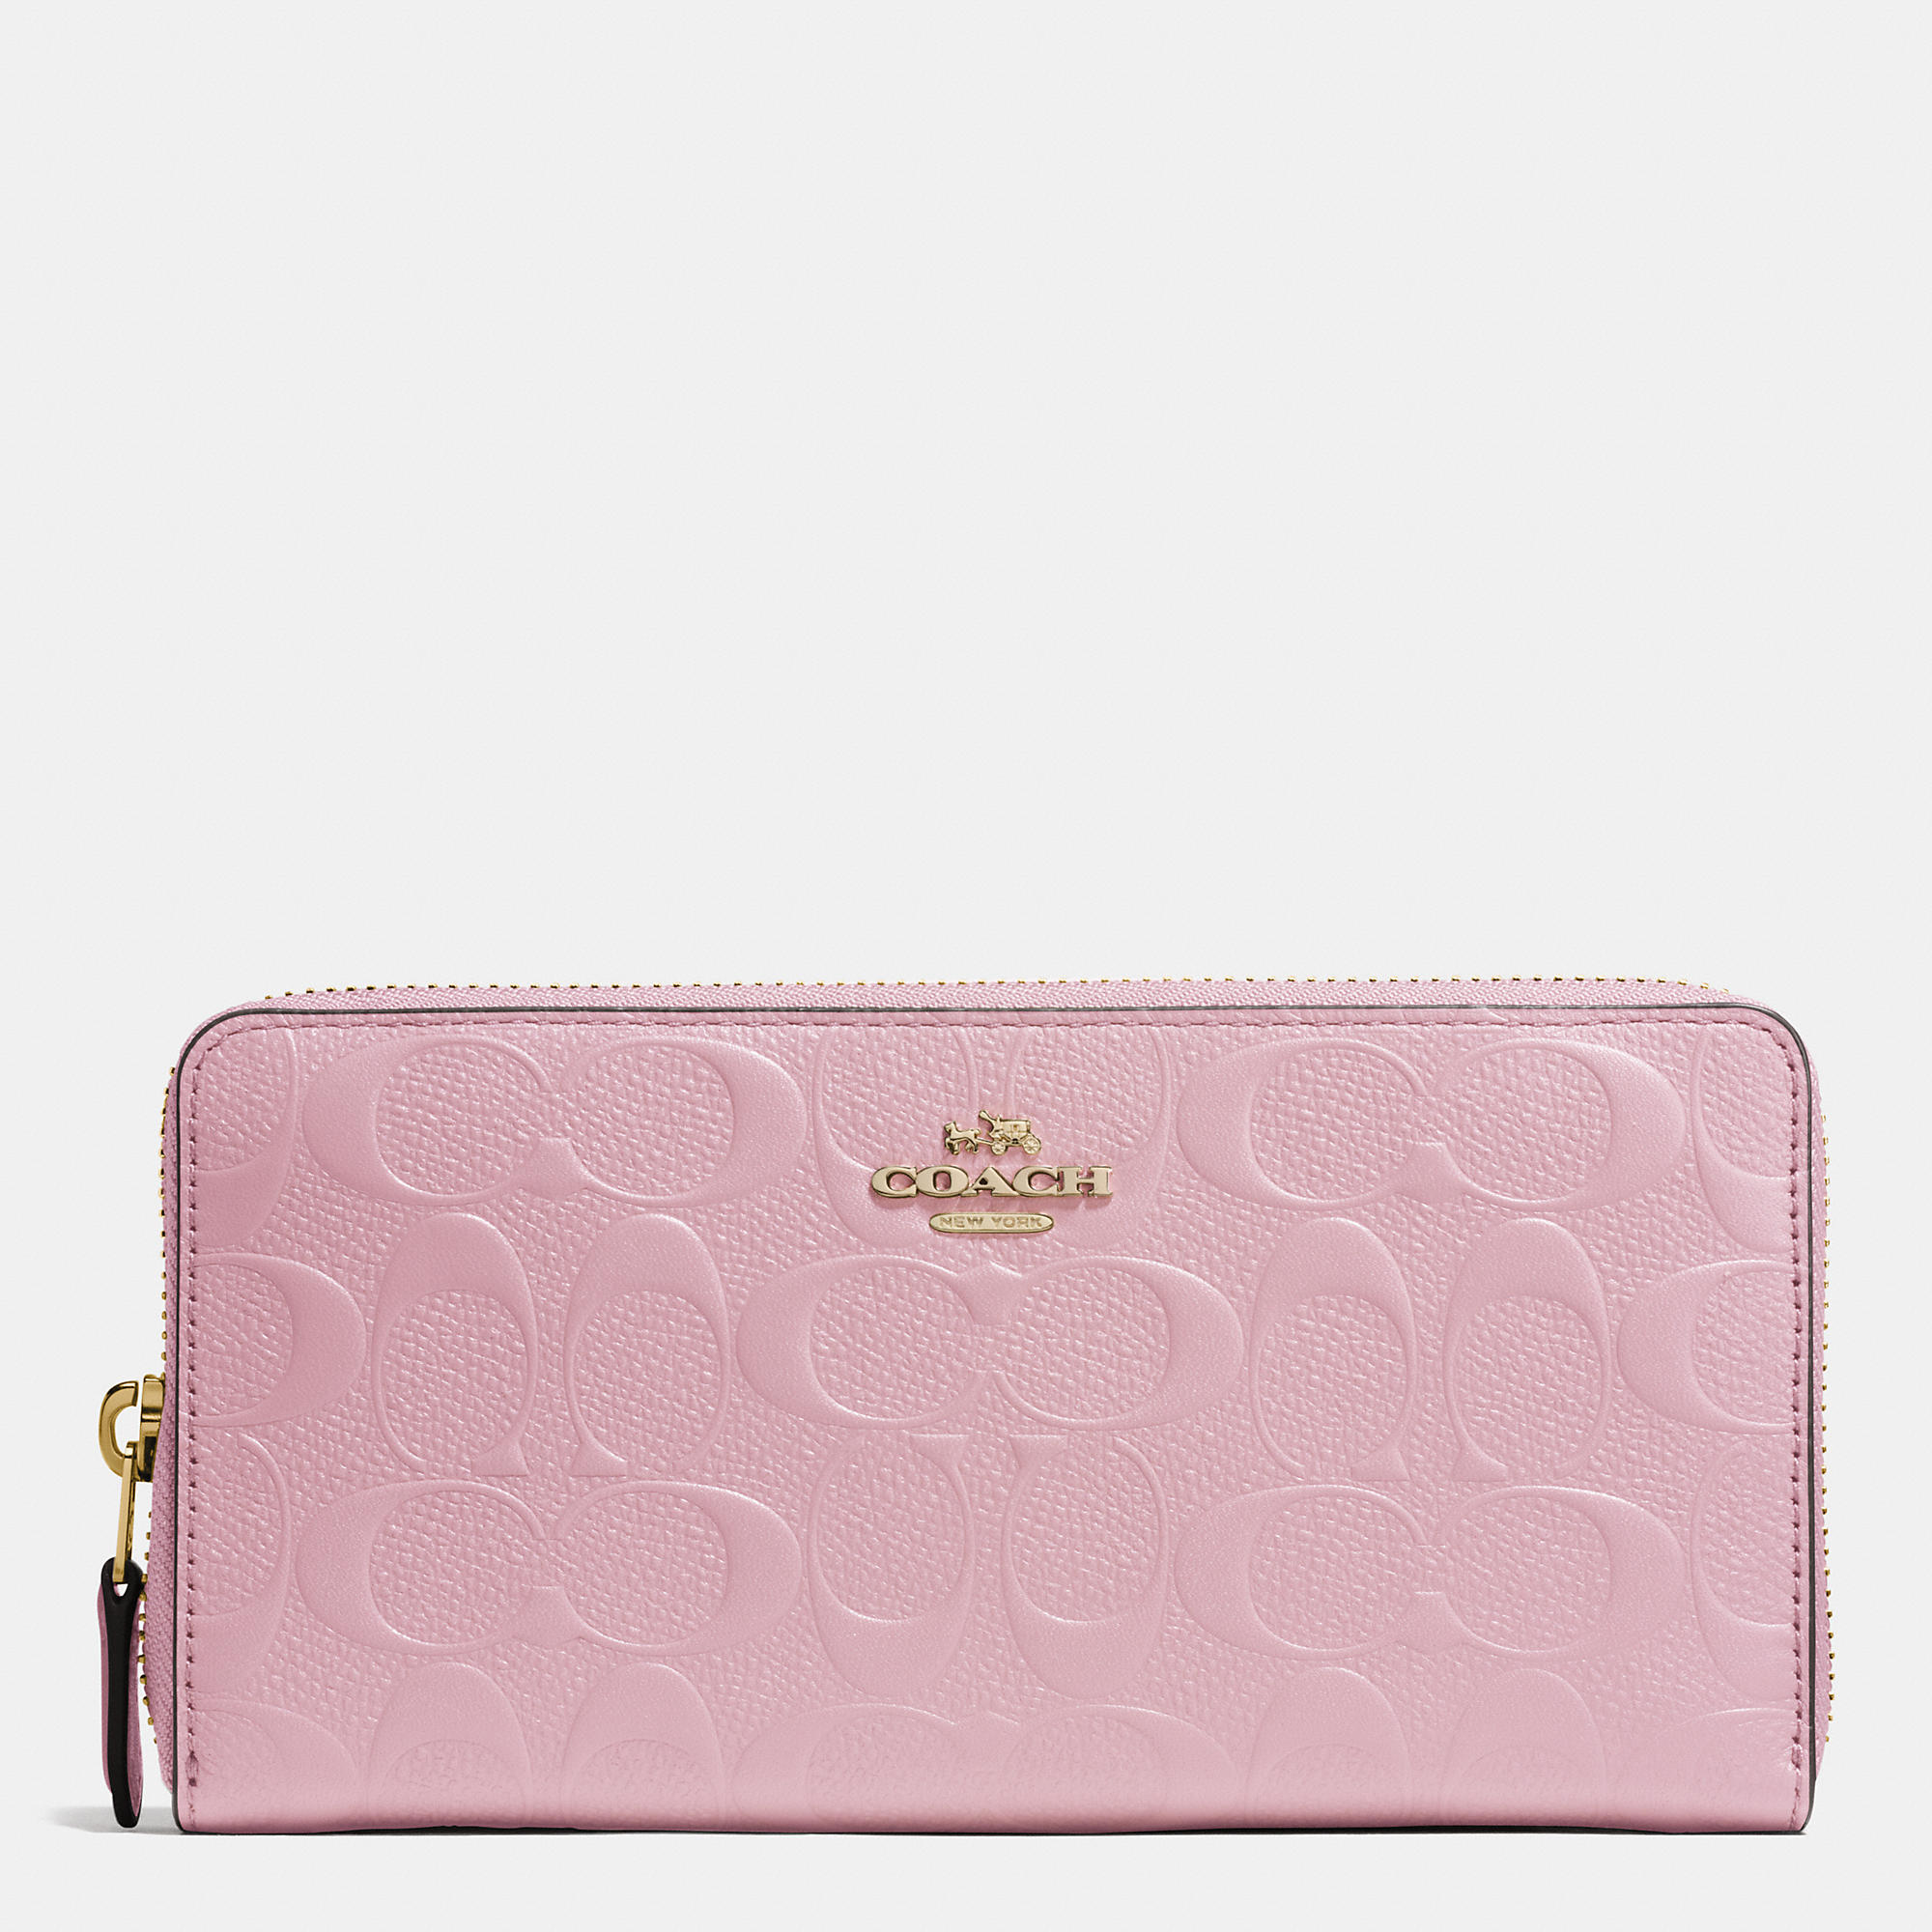 European Style Coach Accordion Zip Wallet In Signature Embossed Leather | Coach Outlet Canada - Click Image to Close